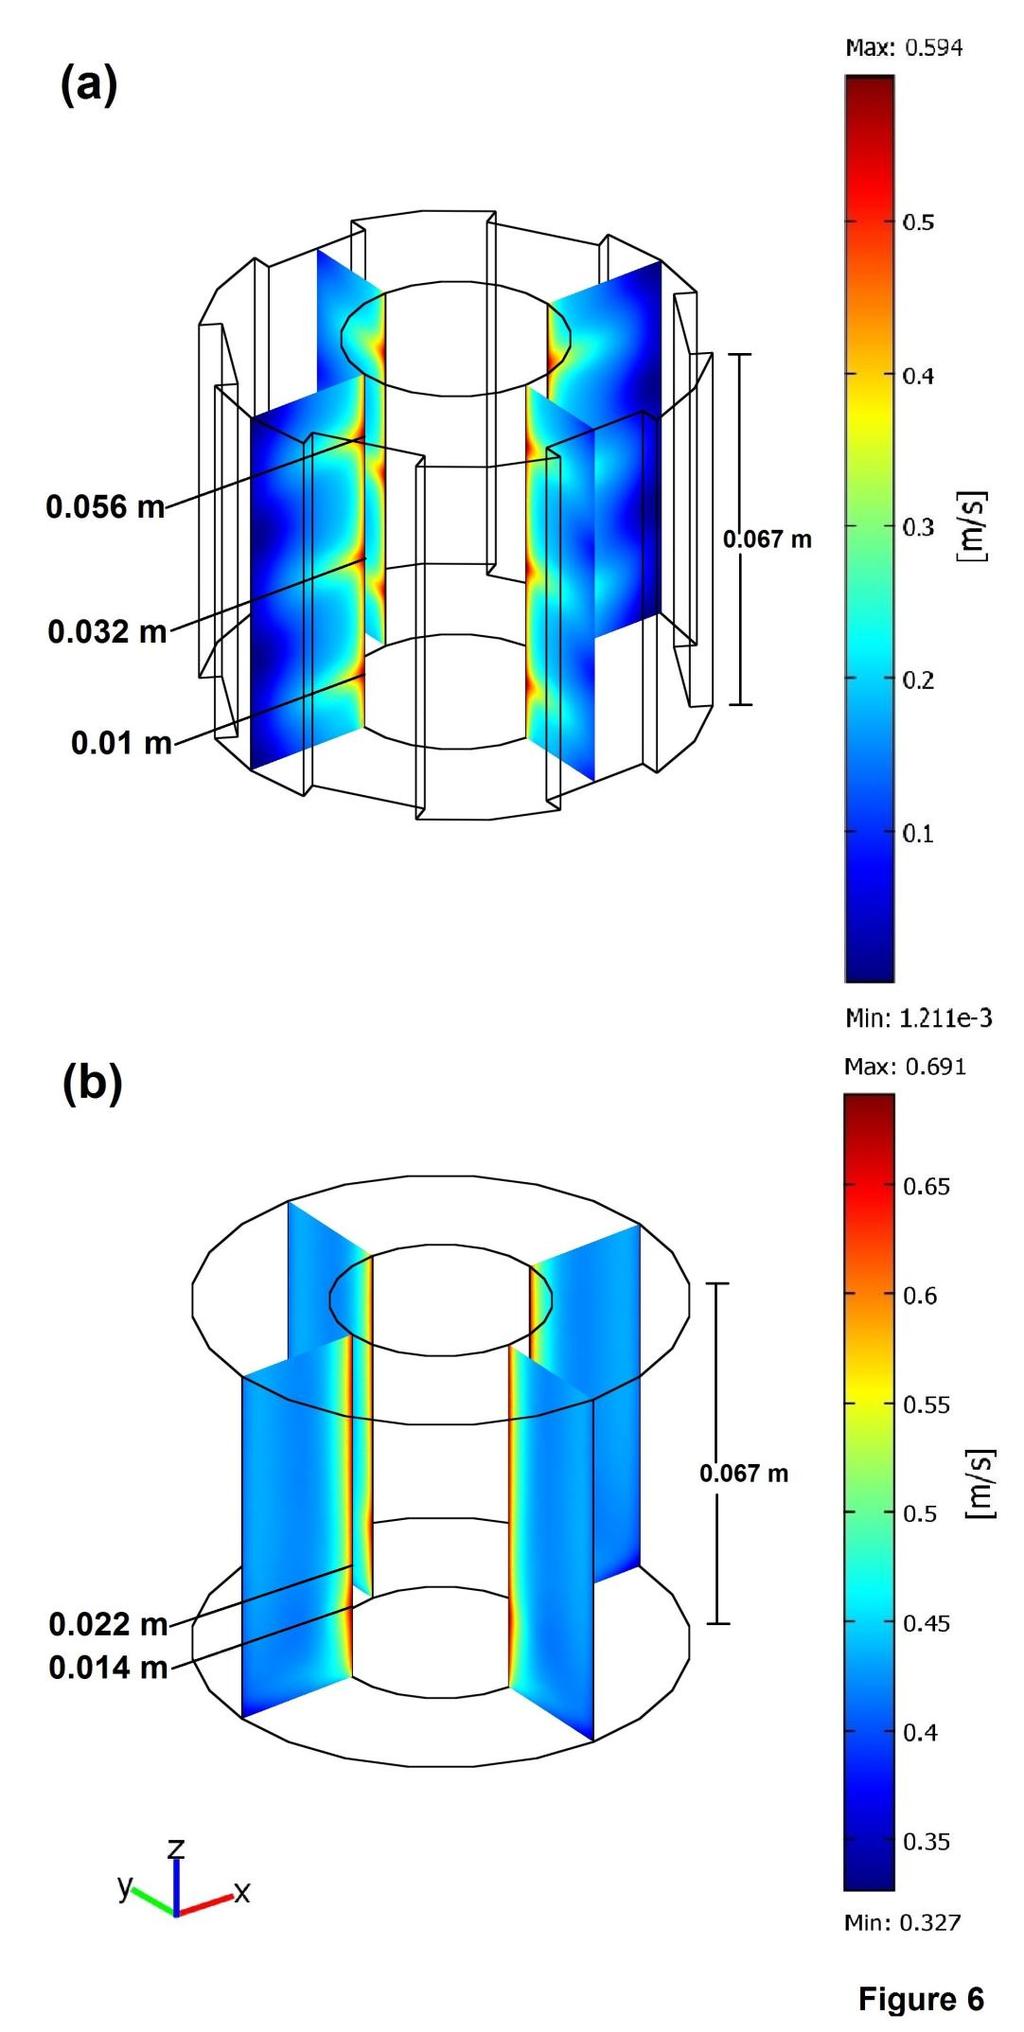 Int. J. Electrochem. Sci., Vol. 8, 2013 4697 Figure 6. Surface plot of the velocity field of a RCE at 900rpm with: (a) six-plate, (b) concentric counter electrodes.